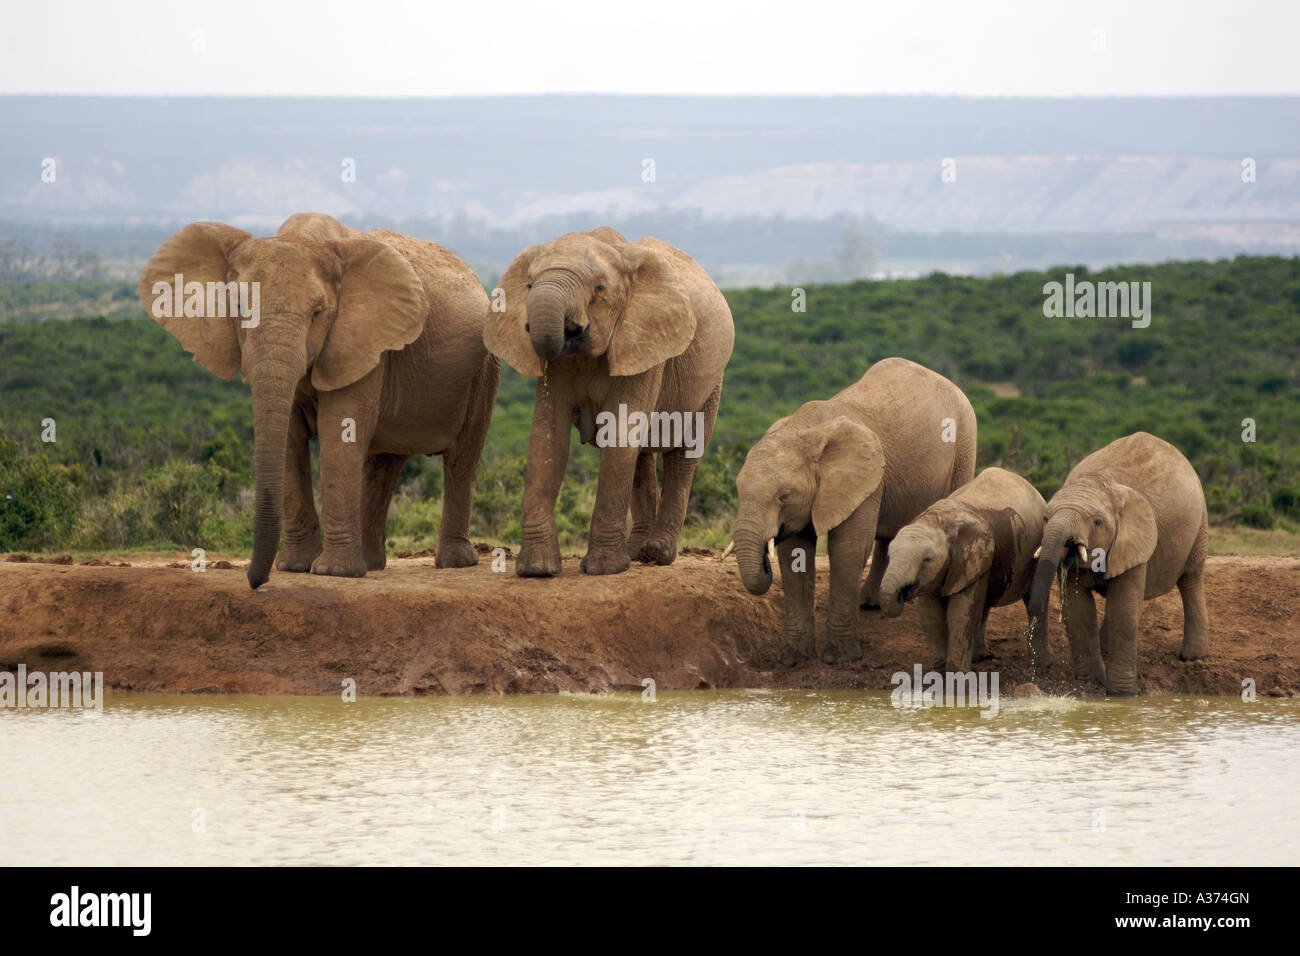 Elephants (Loxodonta Africana) at a waterhole in the Addo Elephant National Park in South Africa's Eastern Cape Province Stock Photo